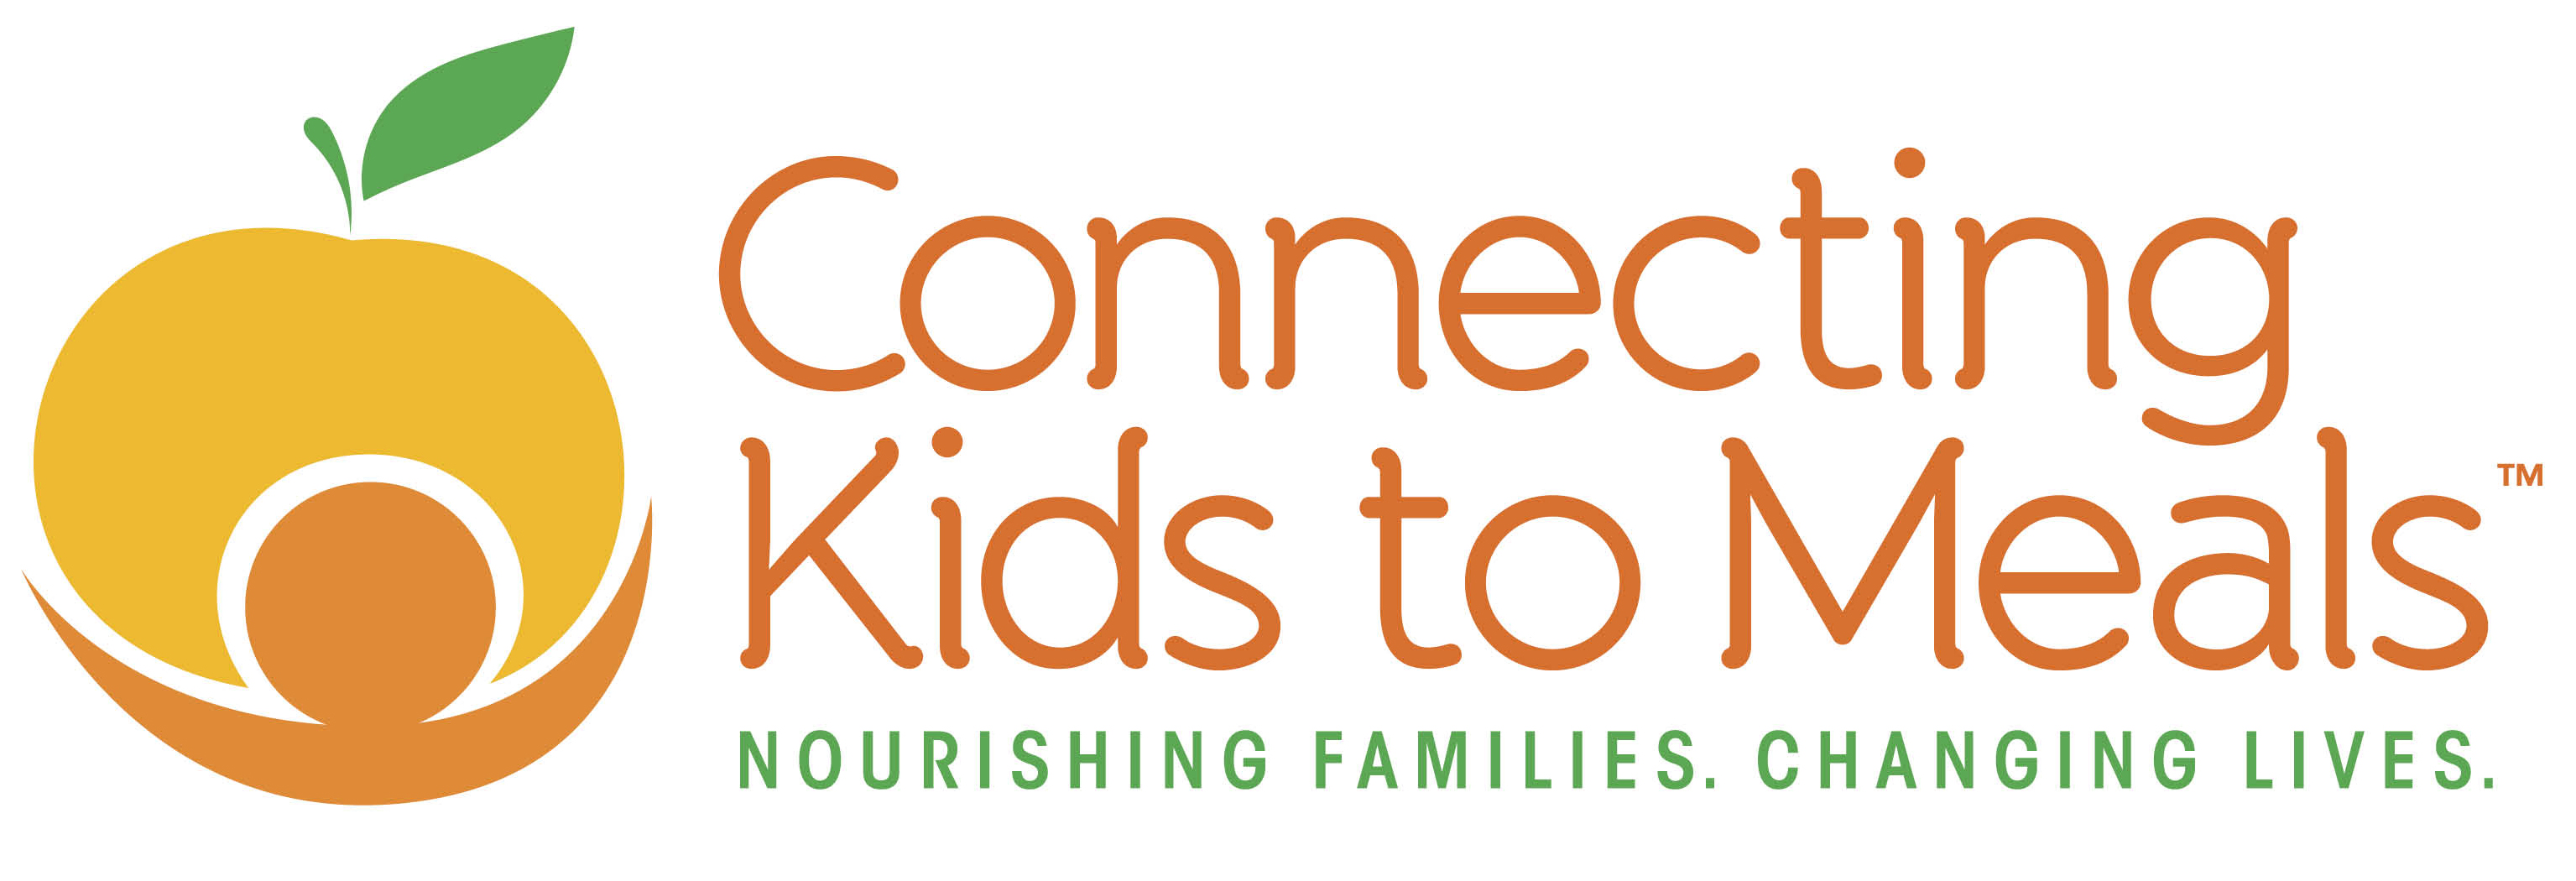 Connecting Kids to Meals